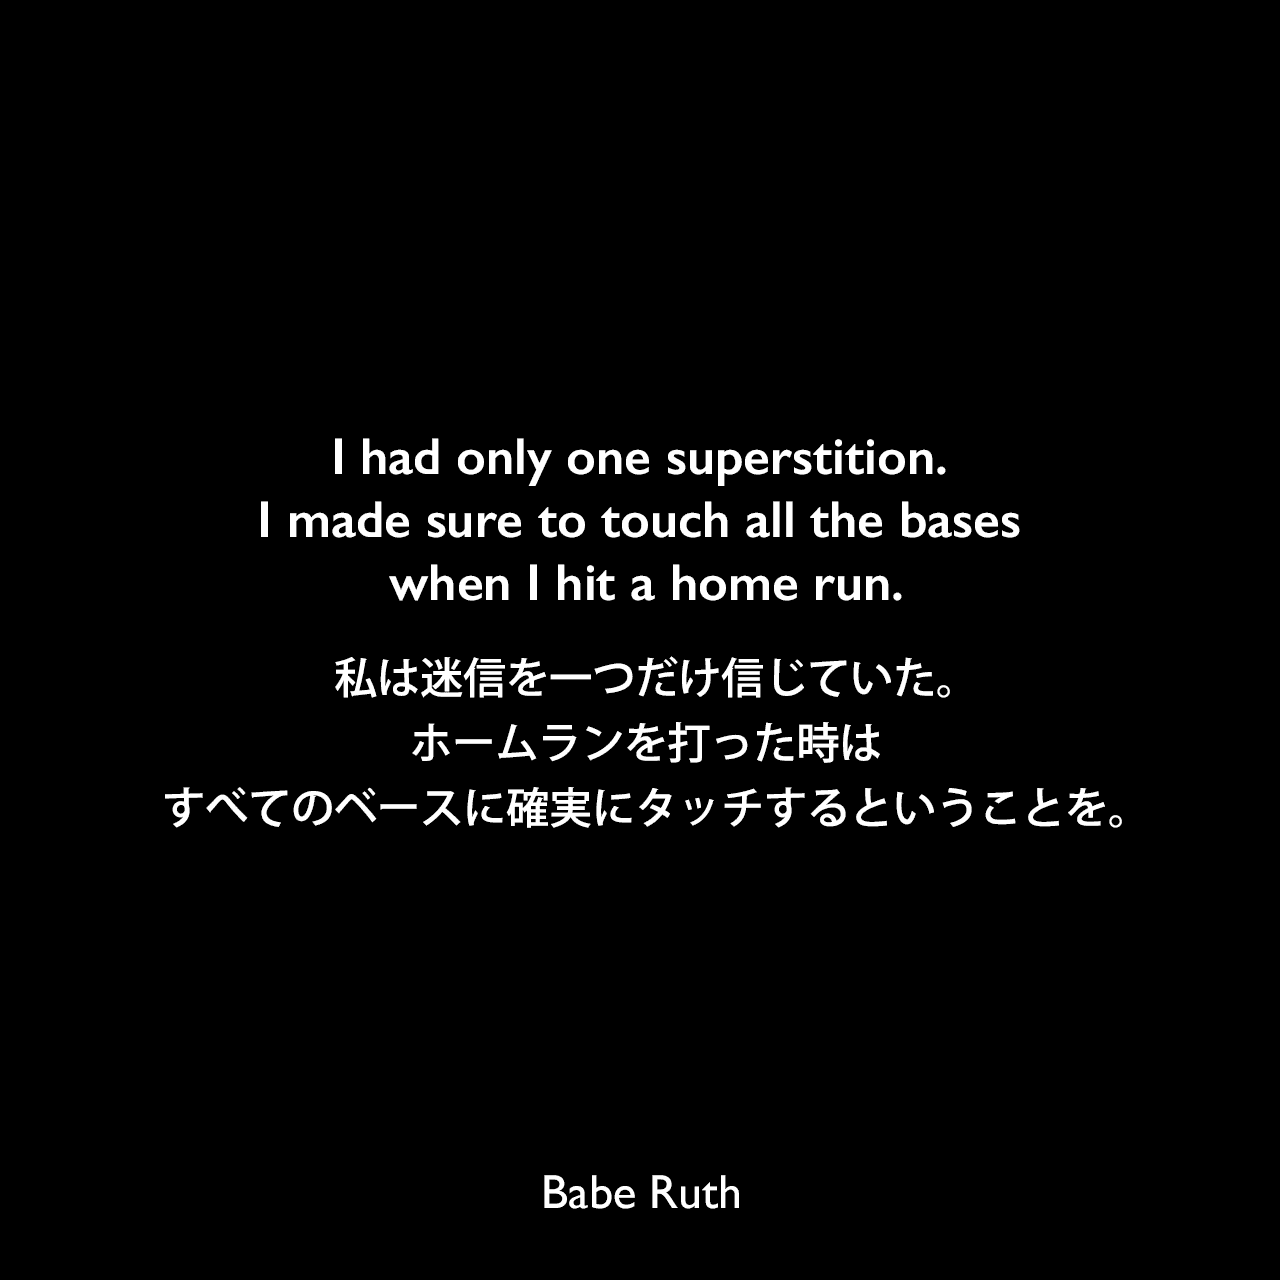 I had only one superstition. I made sure to touch all the bases when I hit a home run.私は迷信を一つだけ信じていた。ホームランを打った時は、すべてのベースに確実にタッチするということを。Babe Ruth